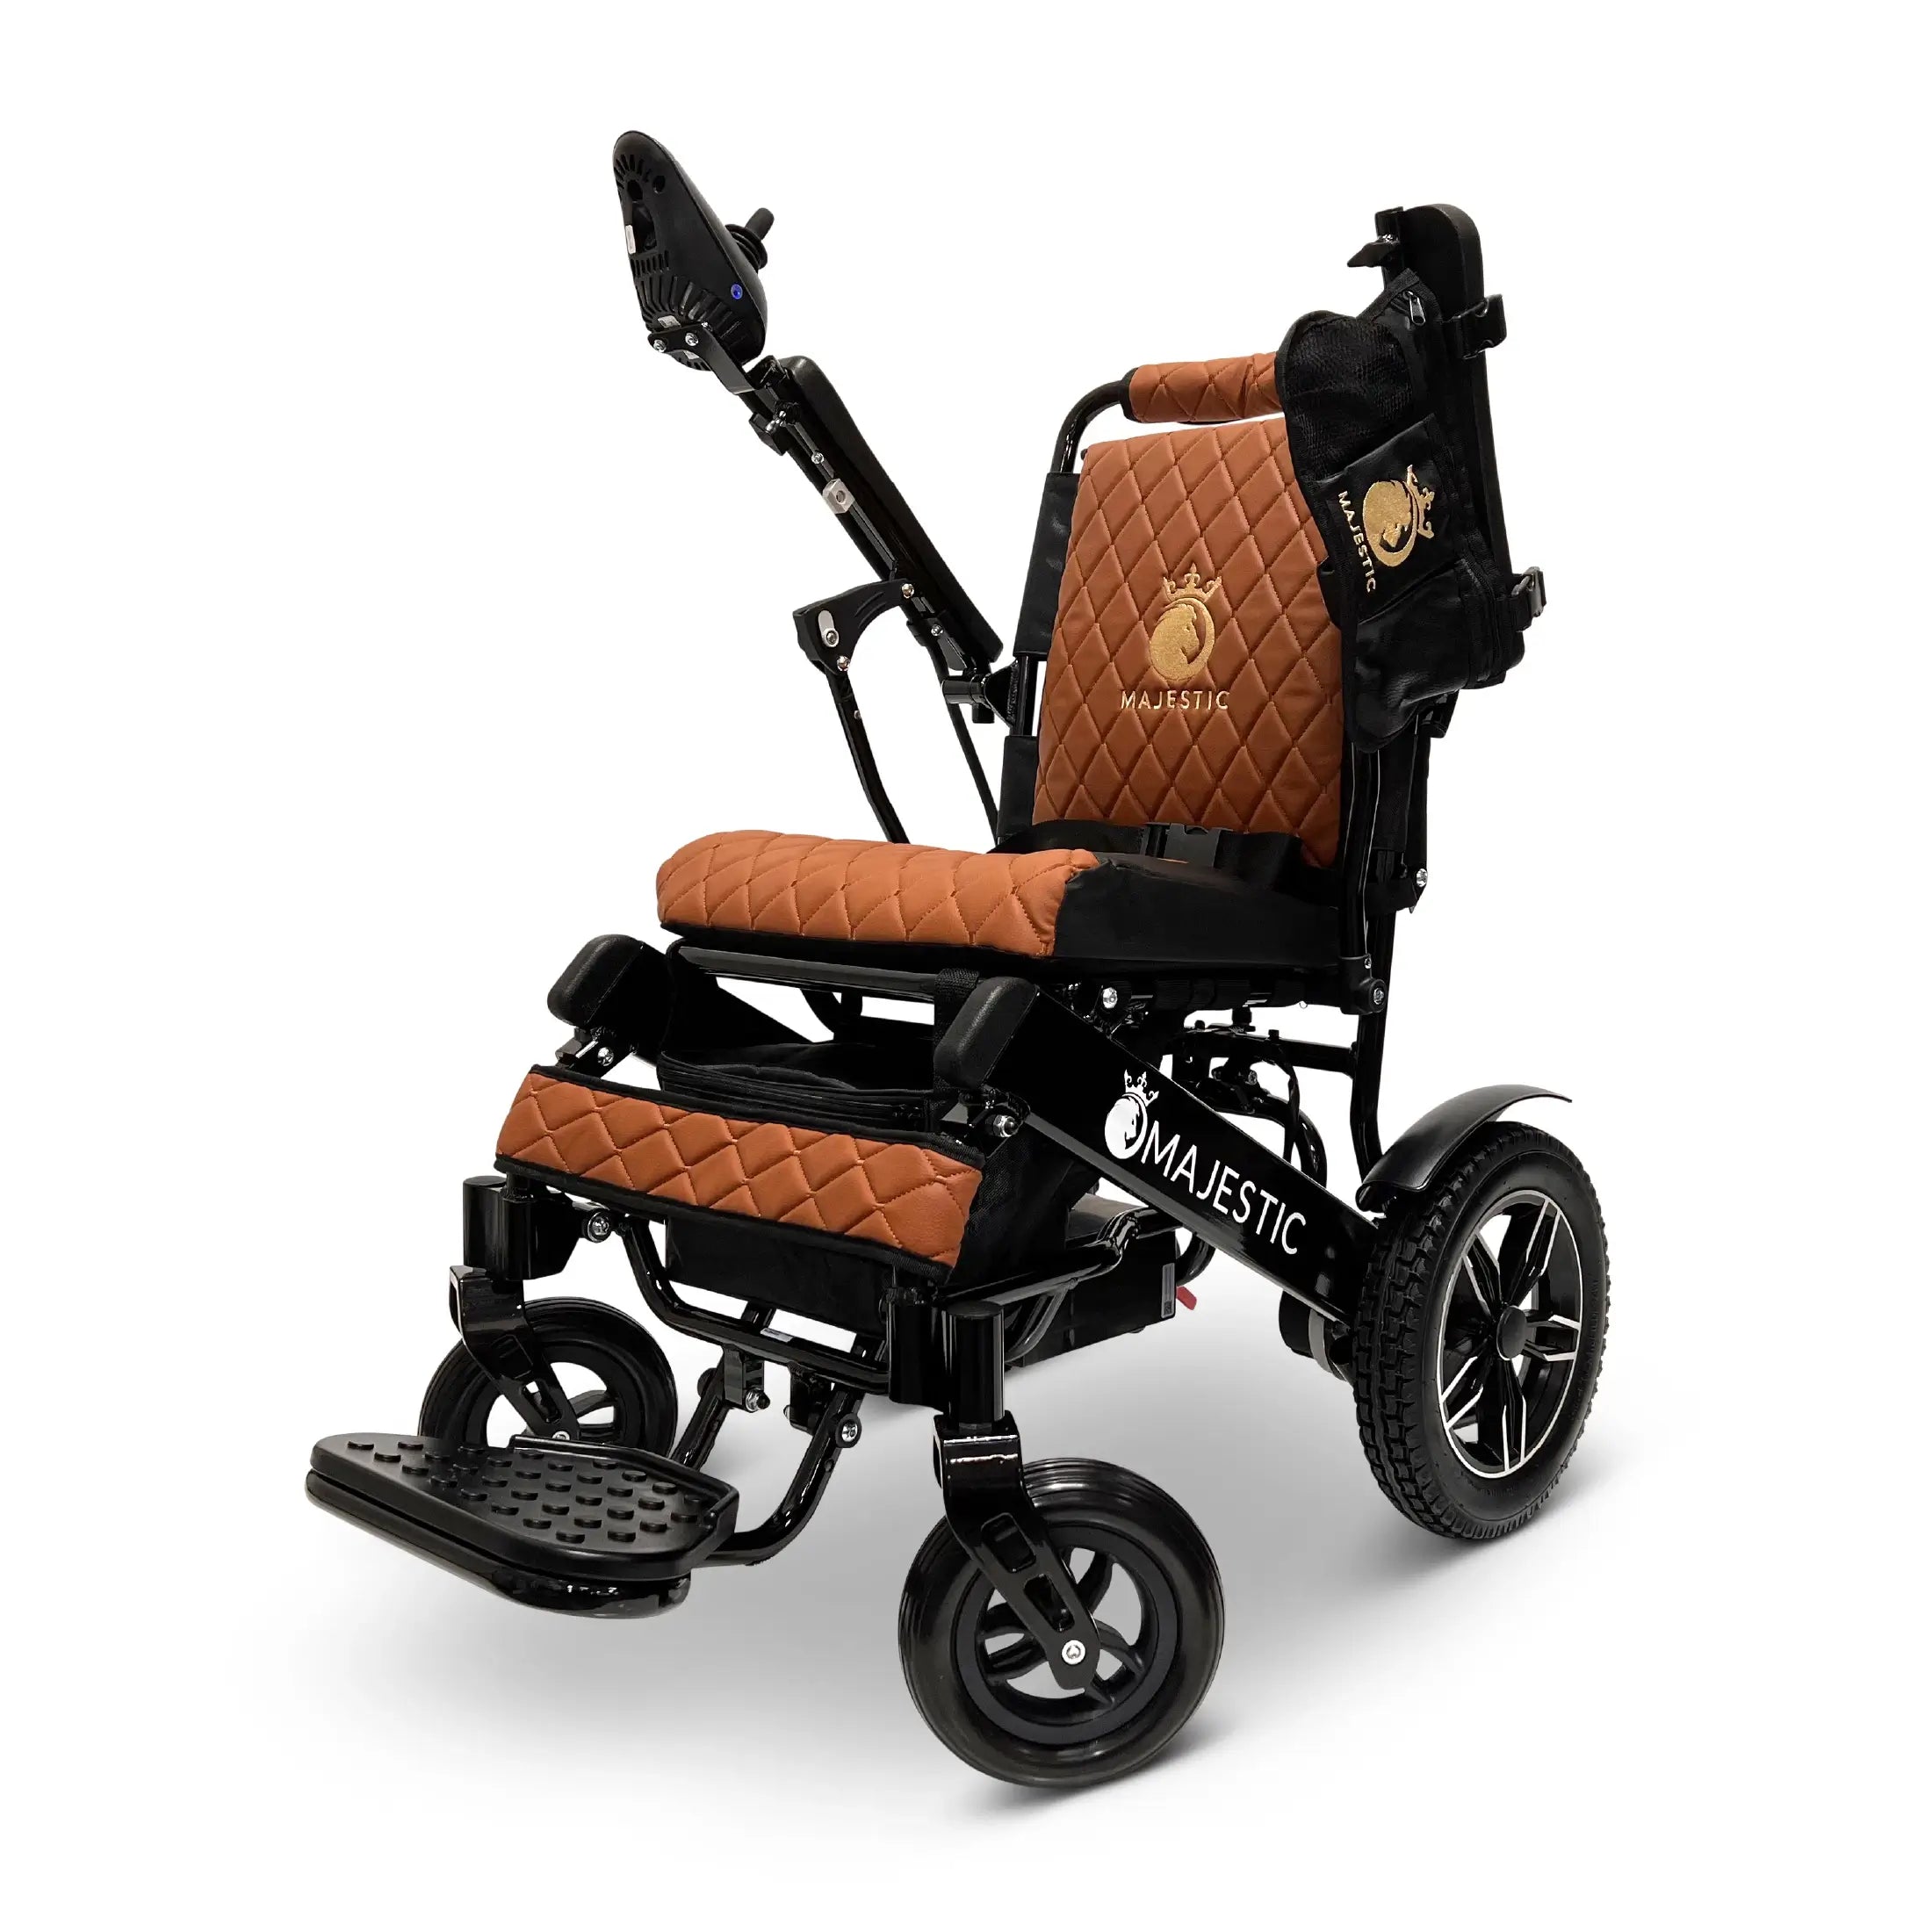 Comfygo Majestic IQ-8000 Remote Controlled Electric Wheelchair